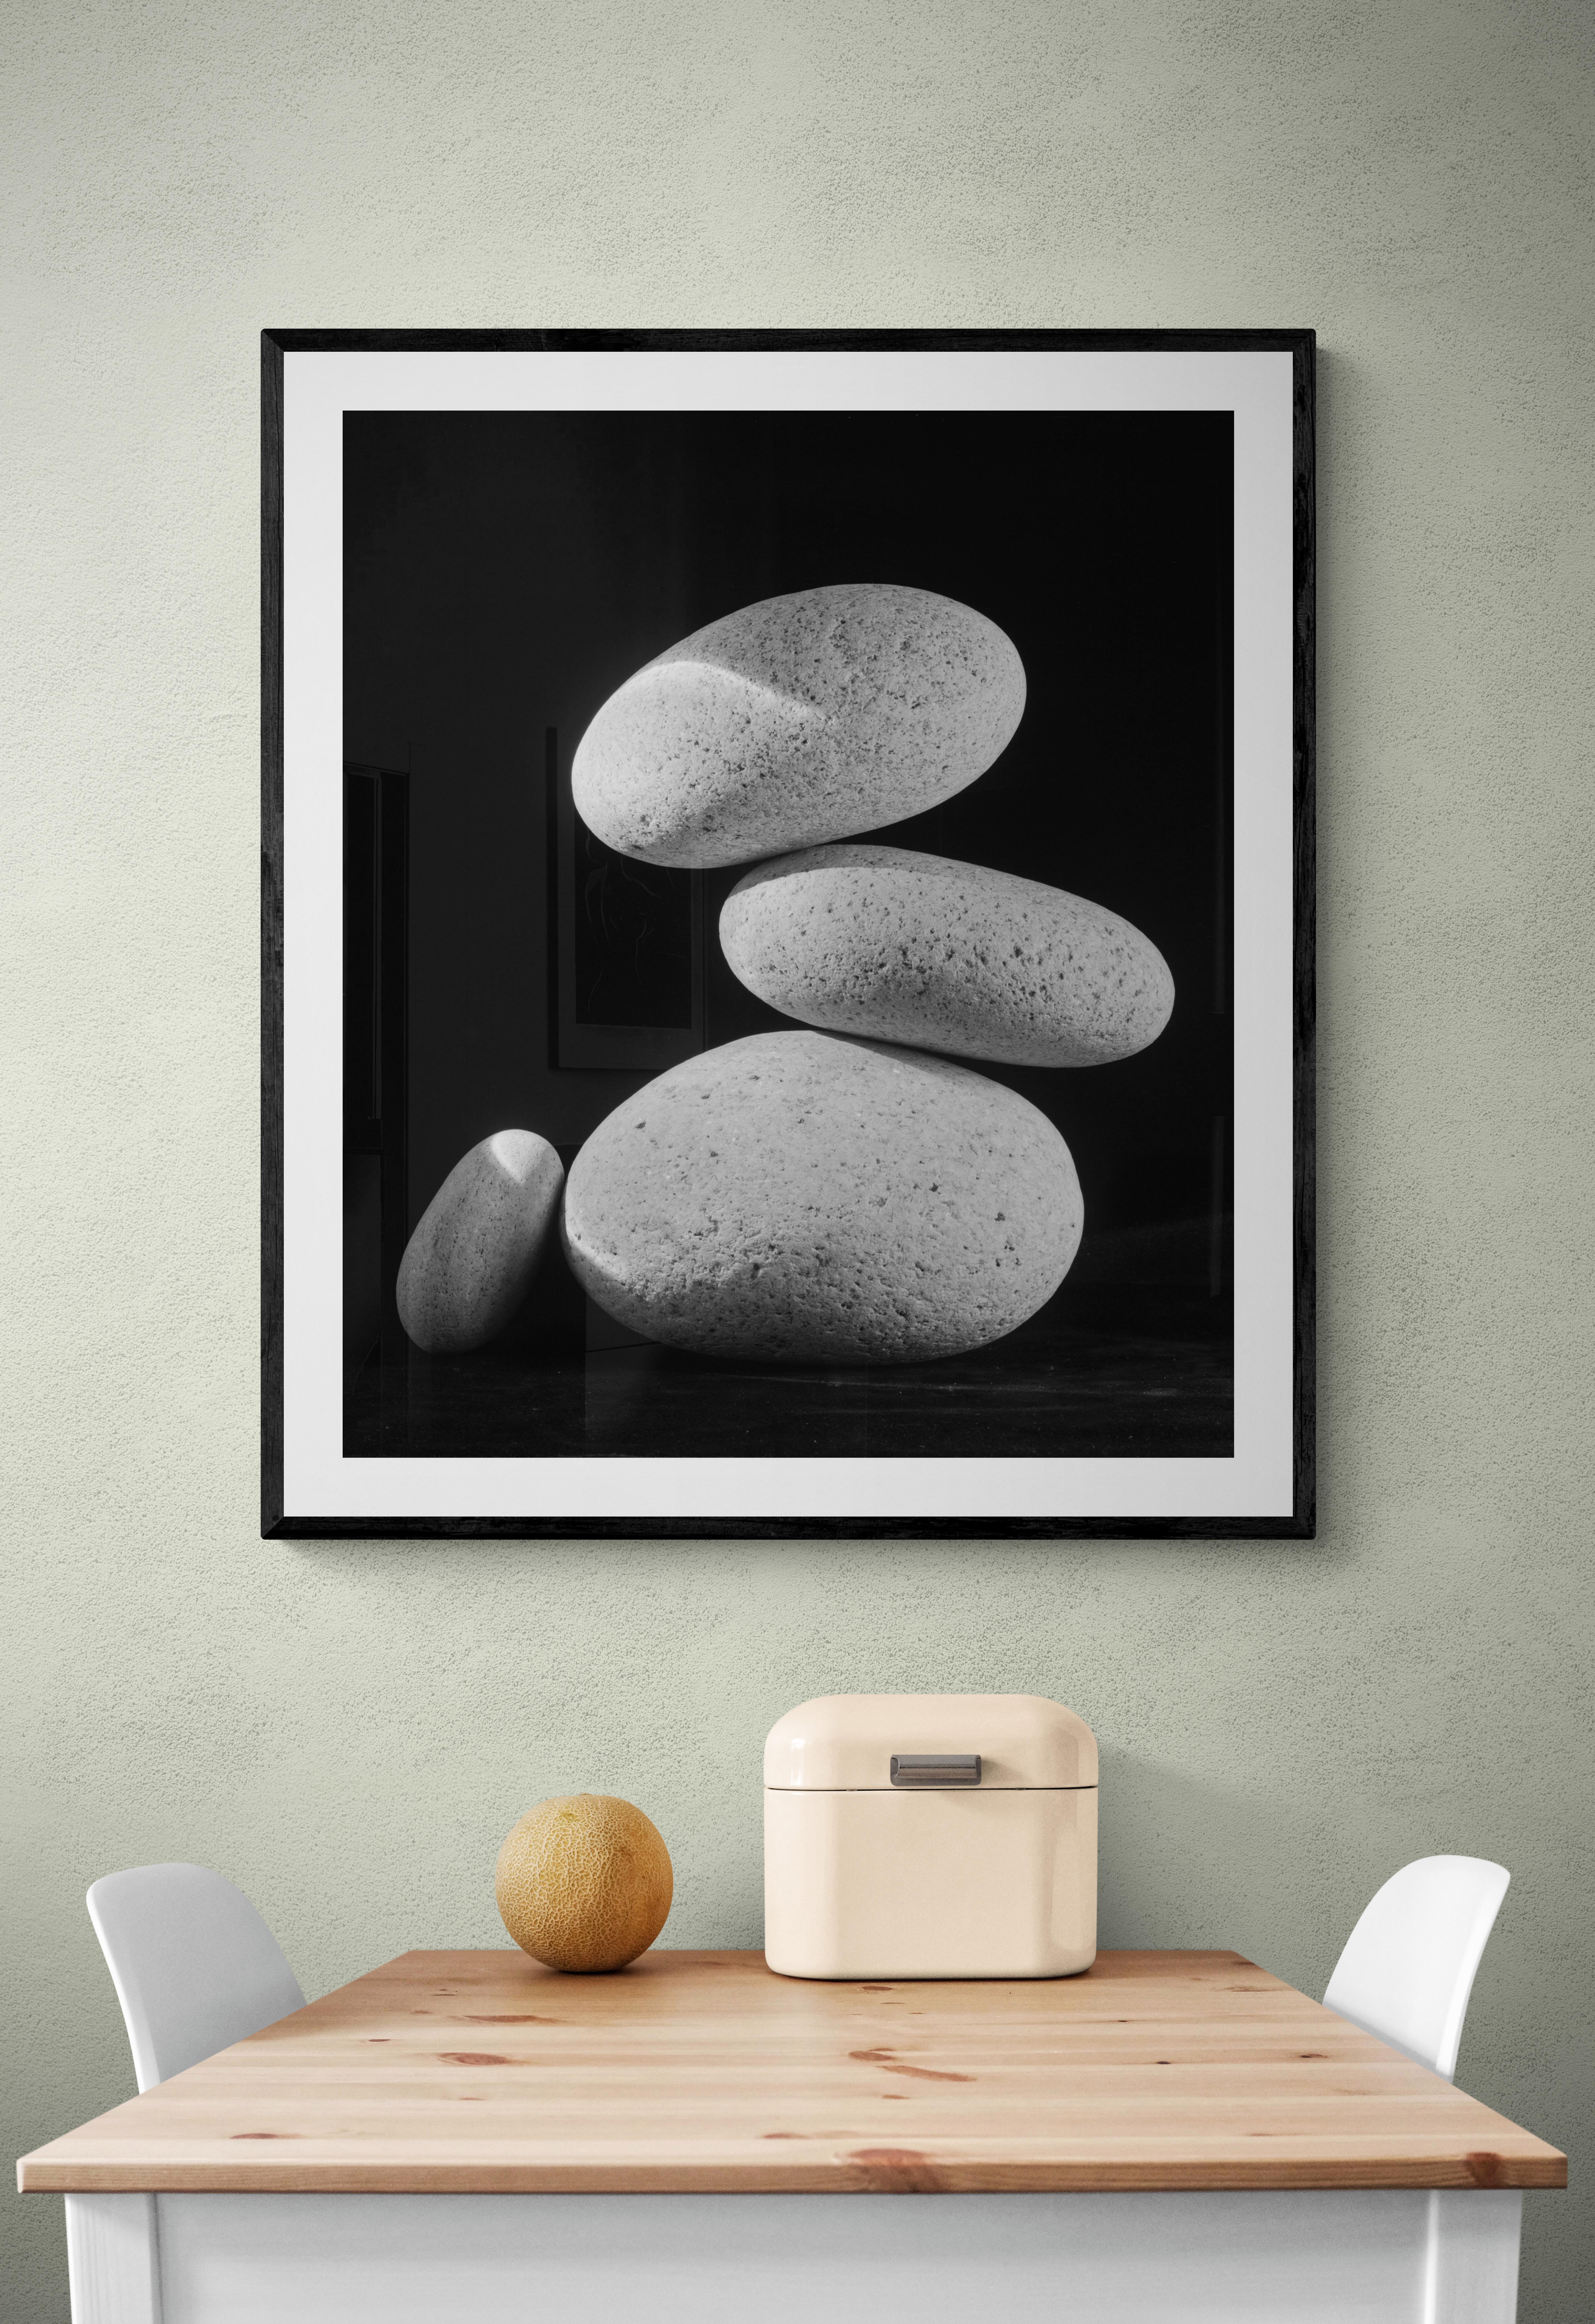  Limited Edition Black and White Photograph Water Stones #15  For Sale 2